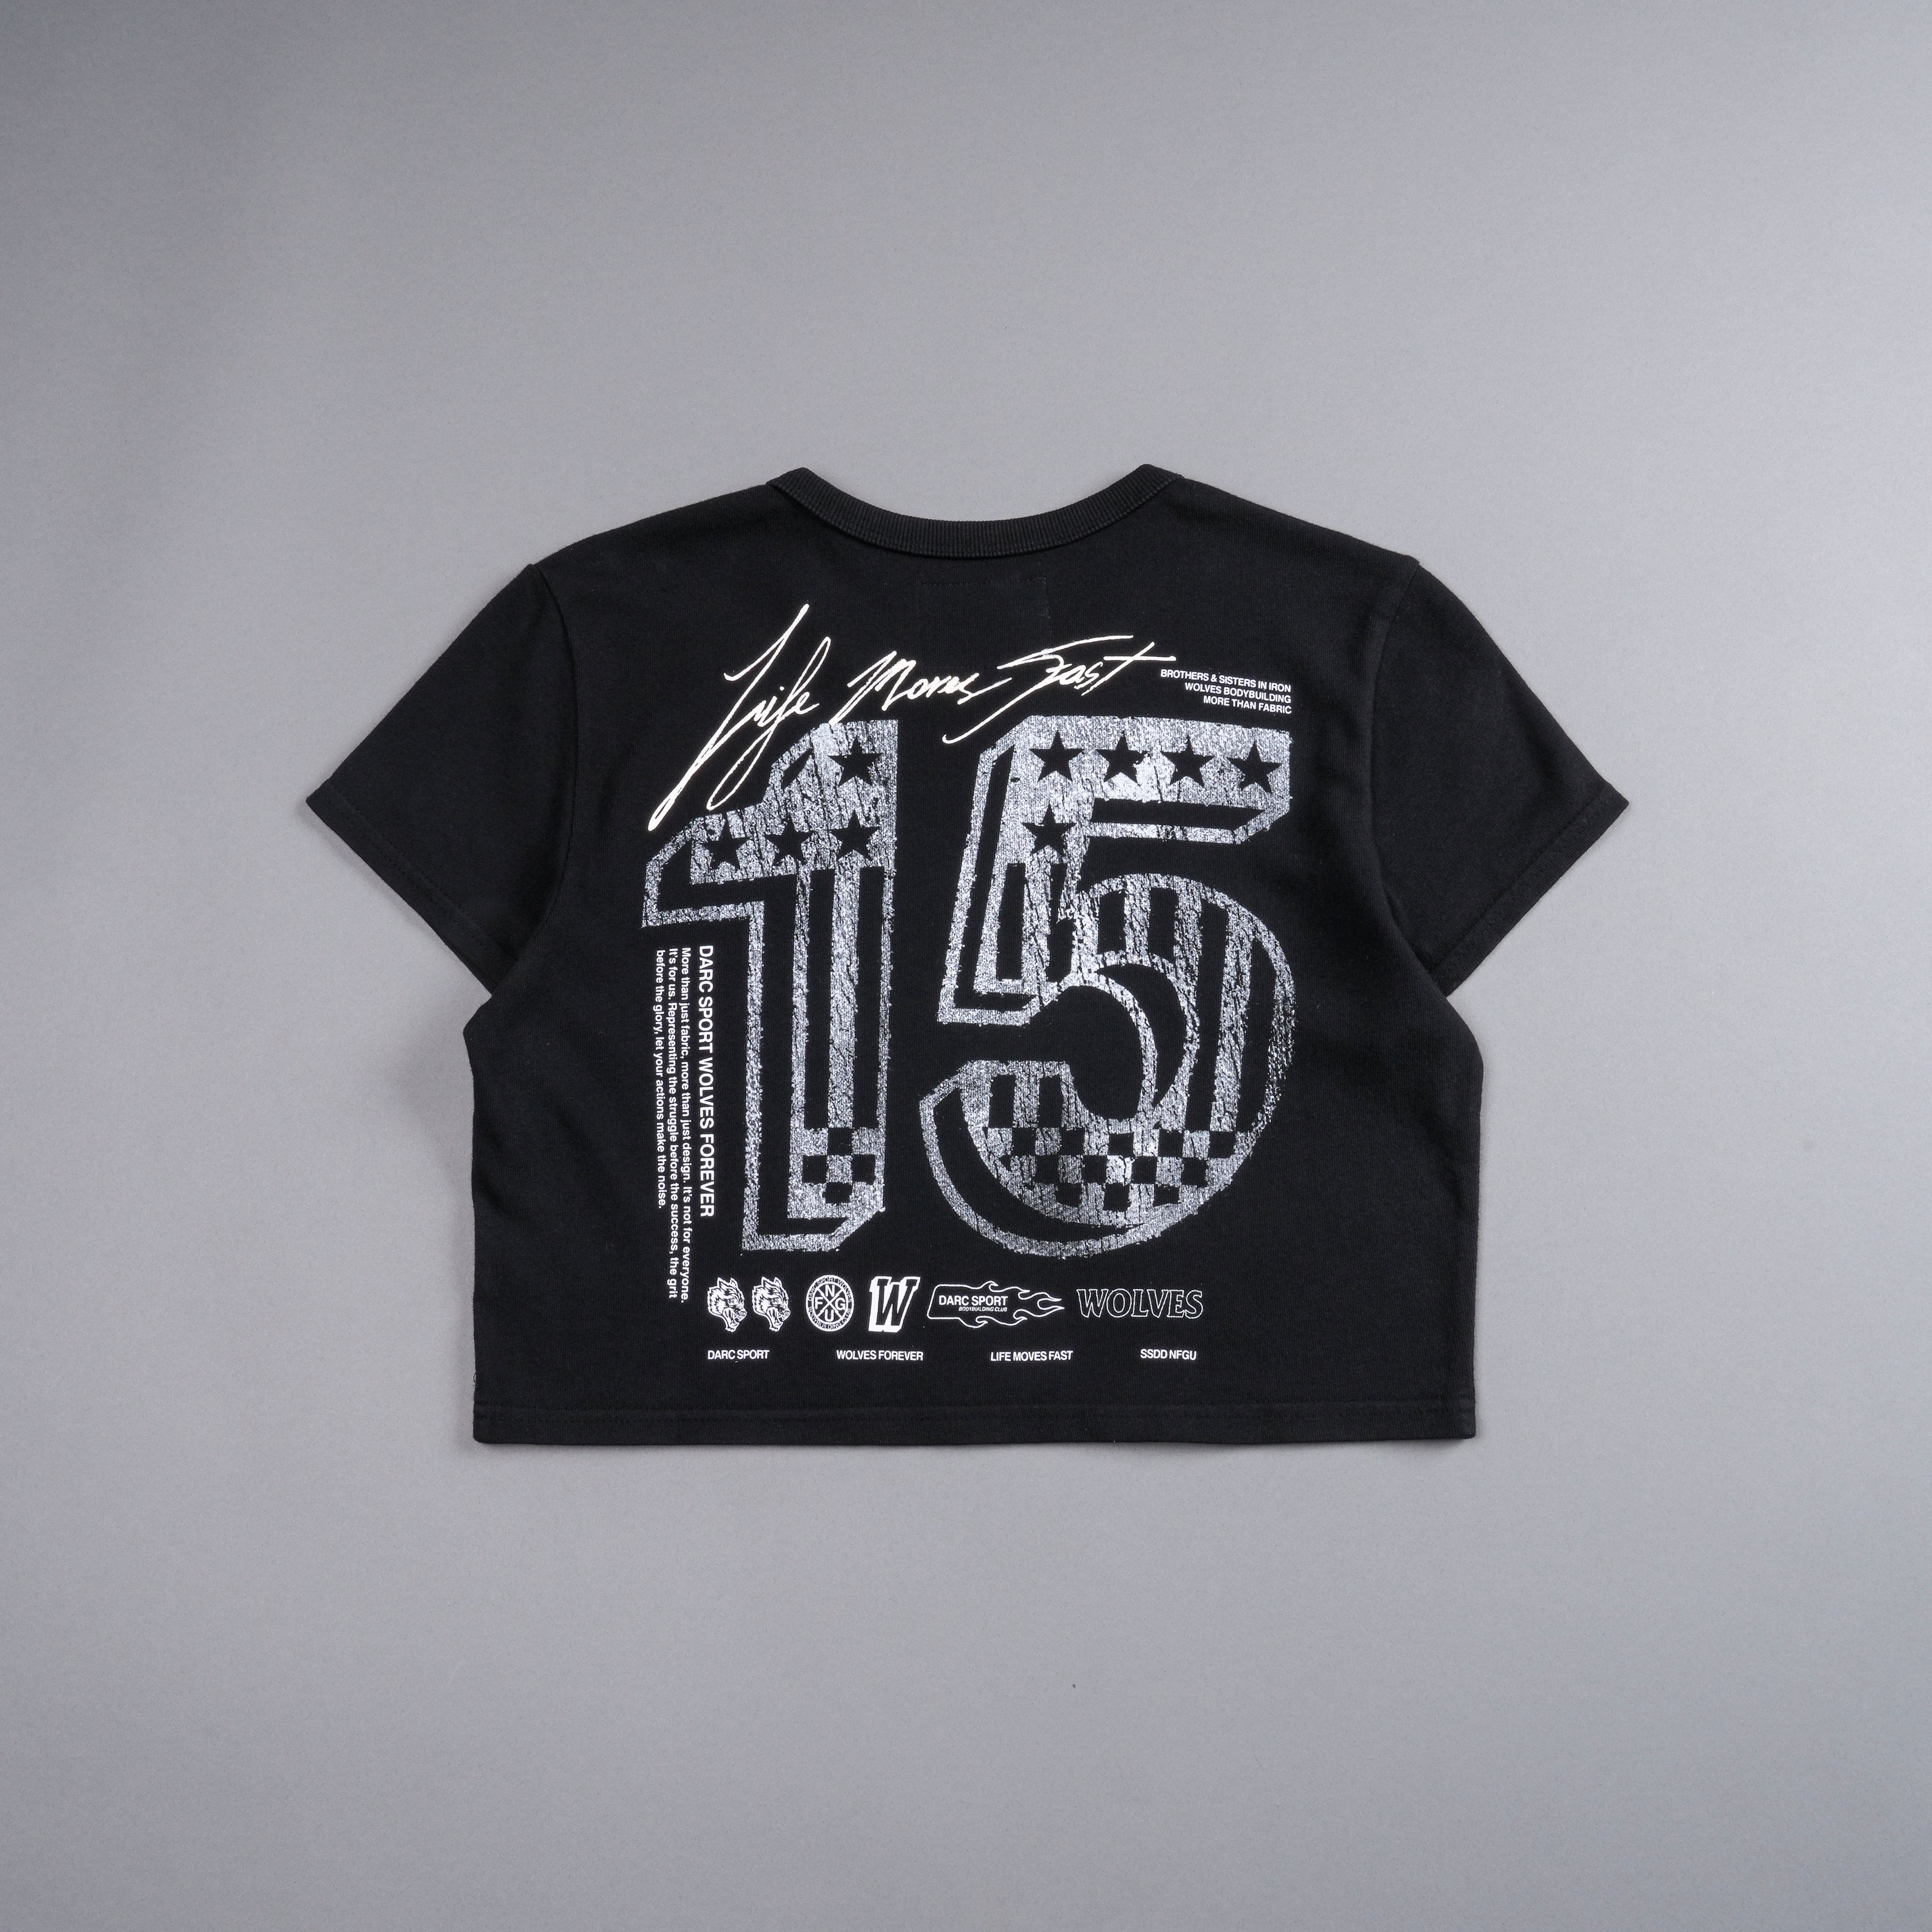 Life Moves Fast V2 "Vintage Timeless" (Cropped) Tee in Black